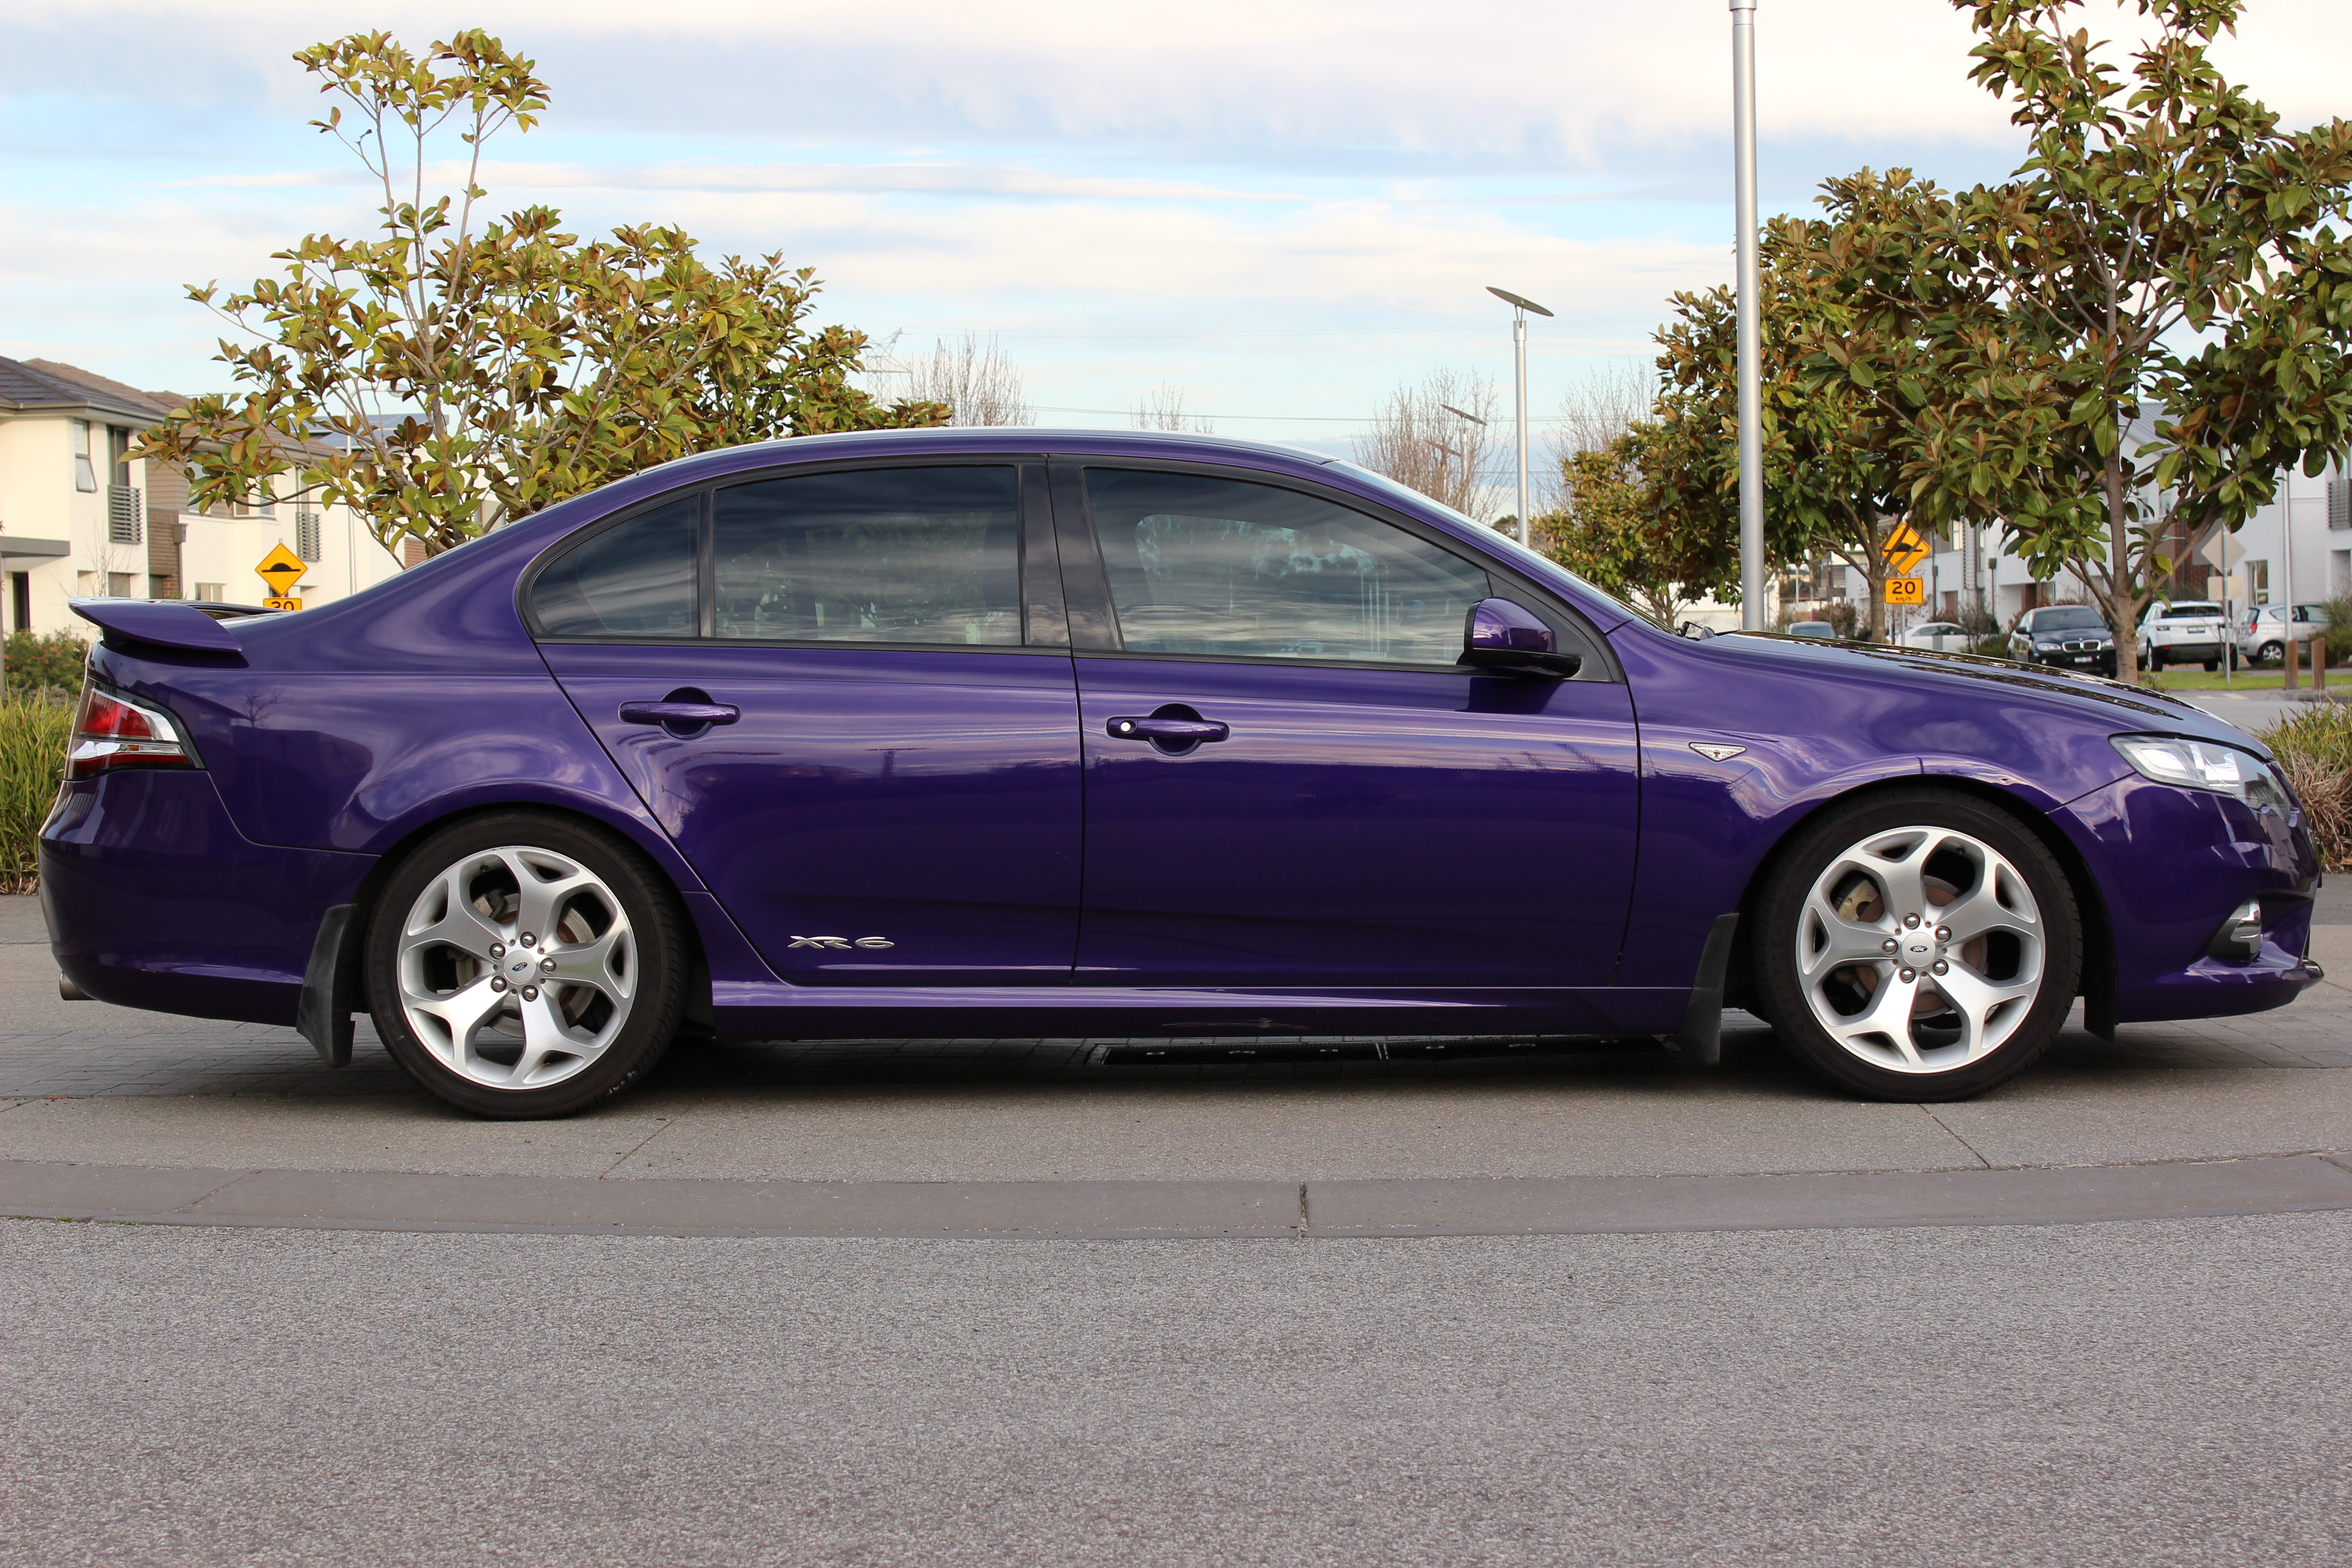 Used ford falcon xr6 sale melbourne #5